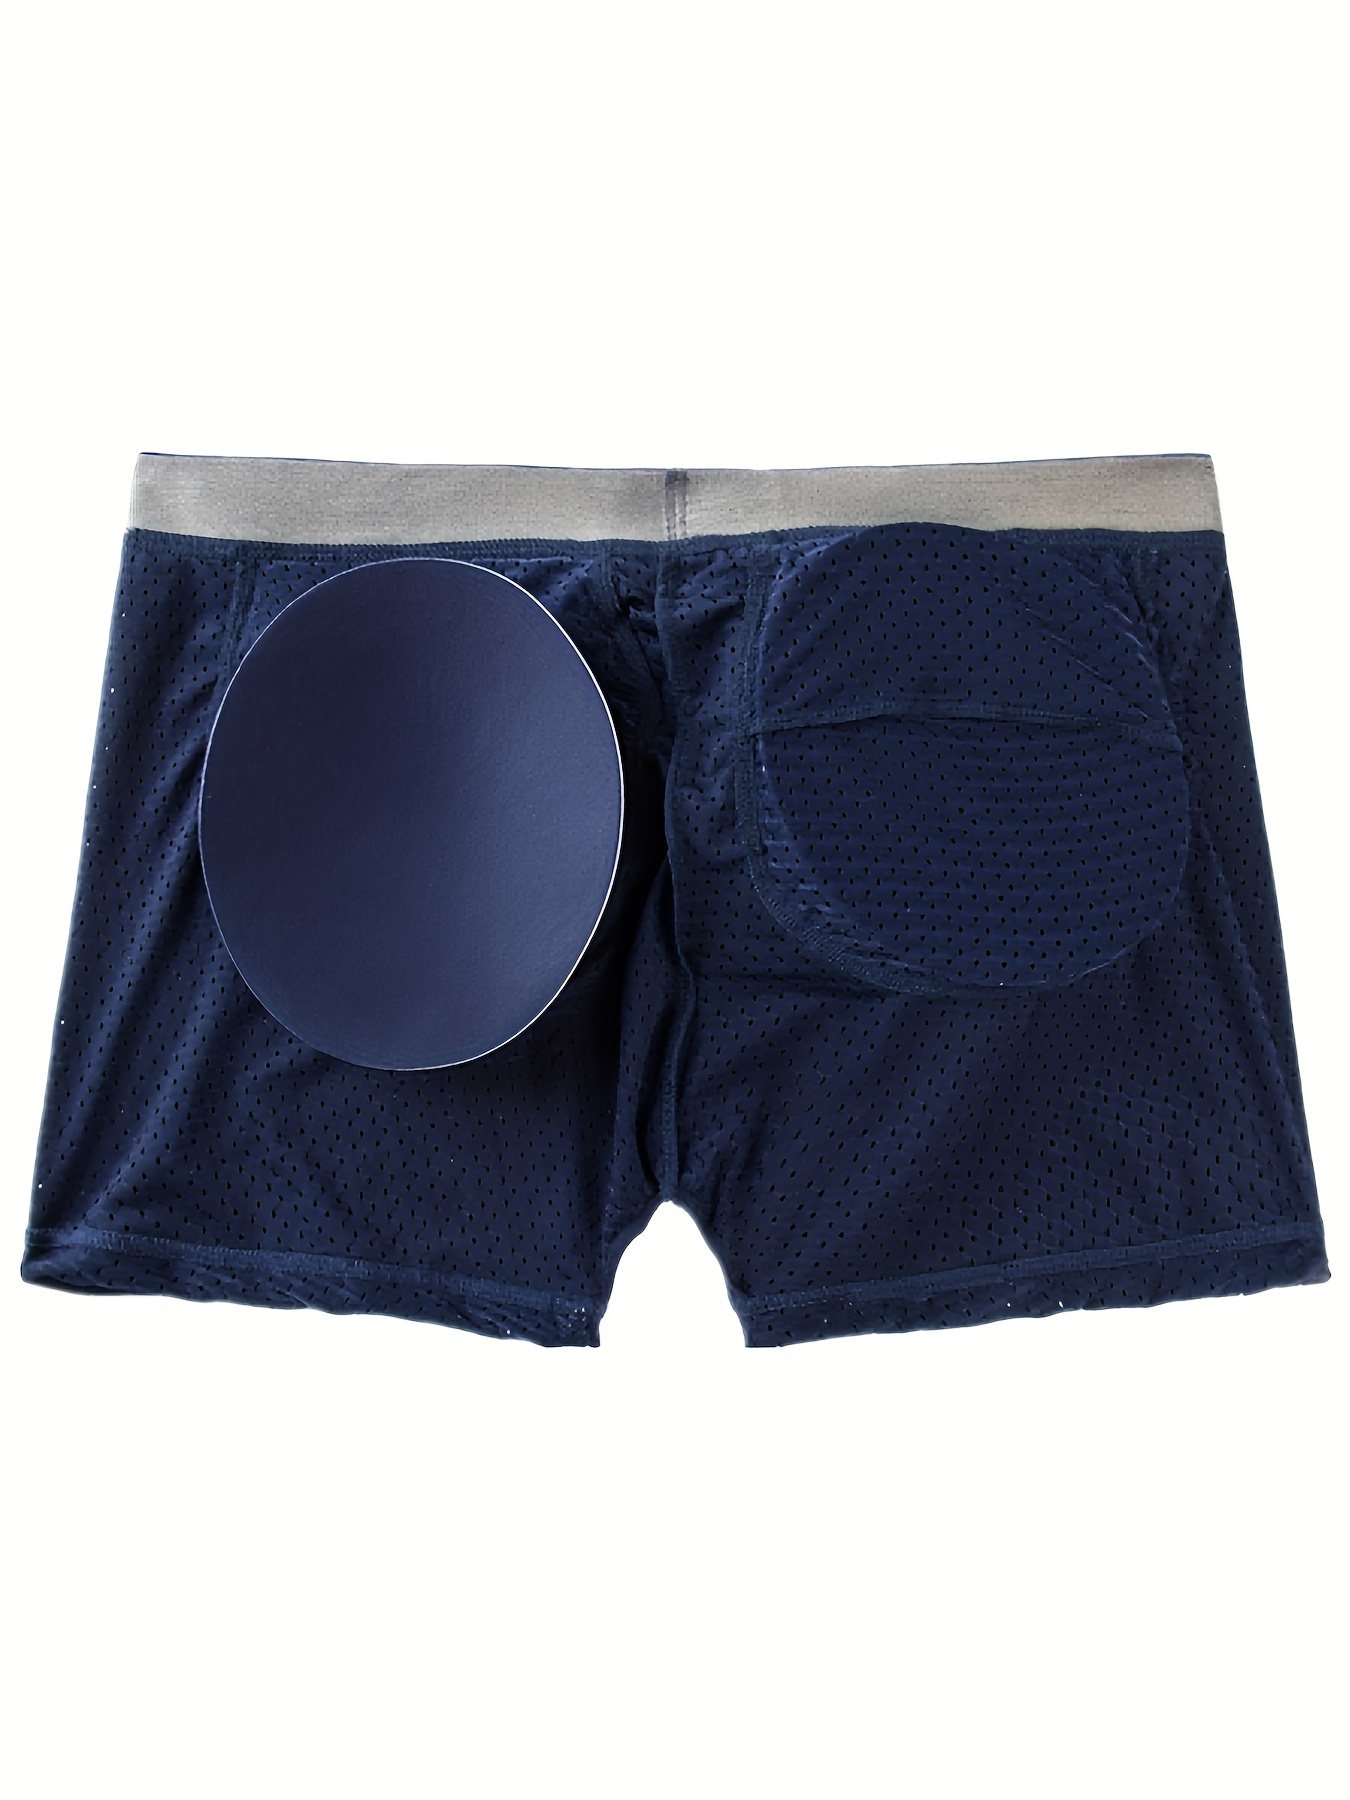 Keep Those Butt Cheeks in Check with the Male Basics Mesh Cheek Boxers